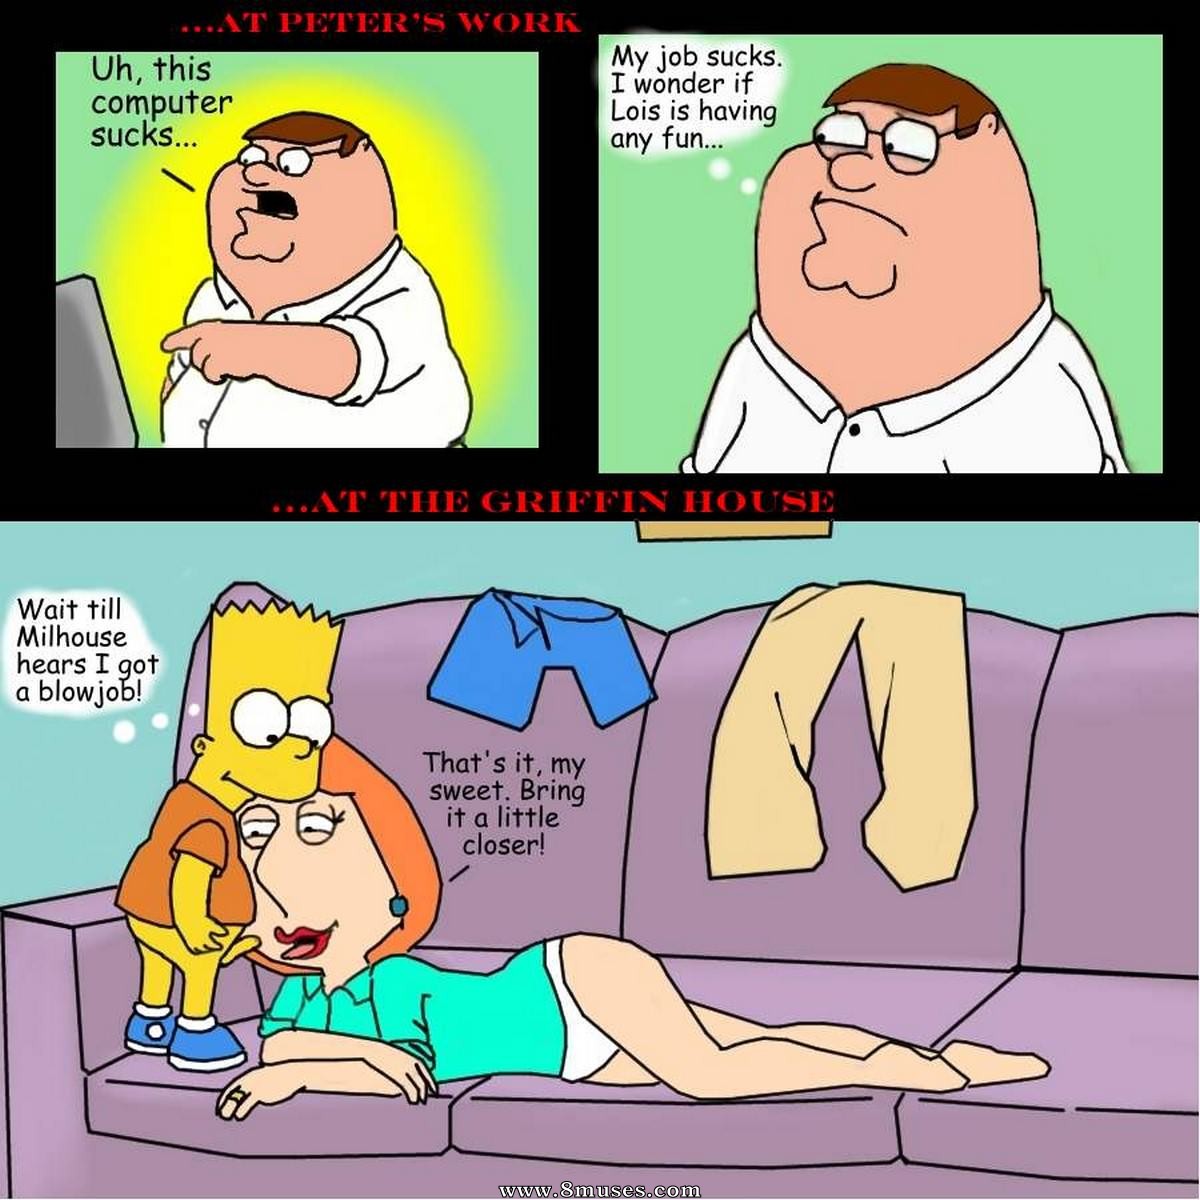 Cartoon Porn Family Guy Xxx Comics - Family Guy Bart simpson and Lois Griffin fucking Issue 1 - 8muses Comics - Sex  Comics and Porn Cartoons